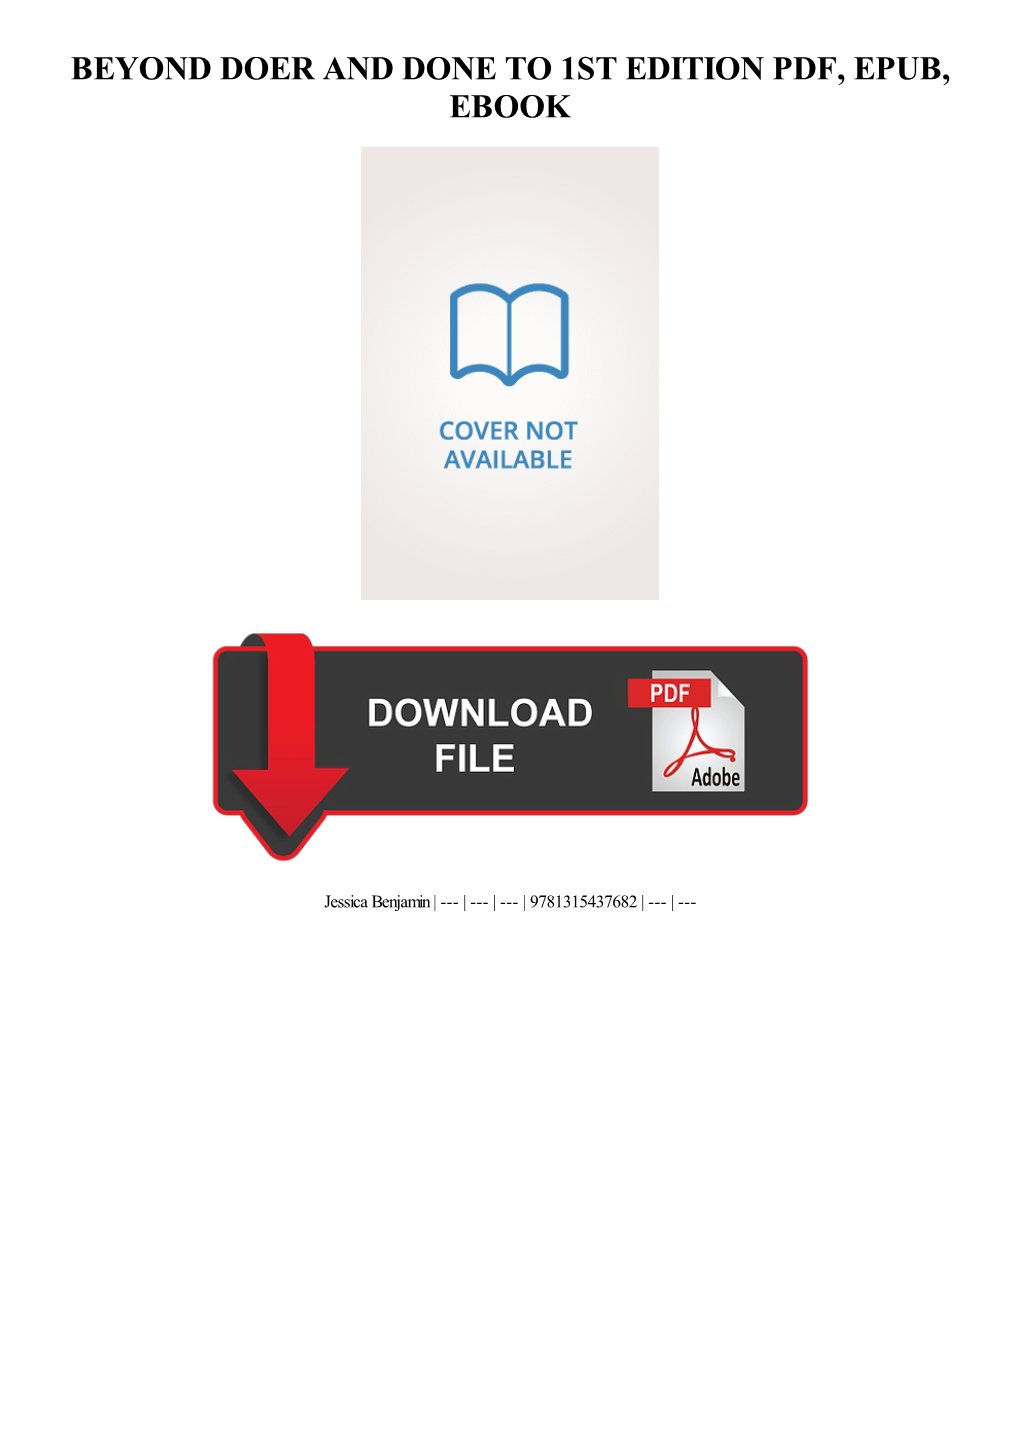 Ebook Download Beyond Doer and Done to 1St Edition Ebook, Epub